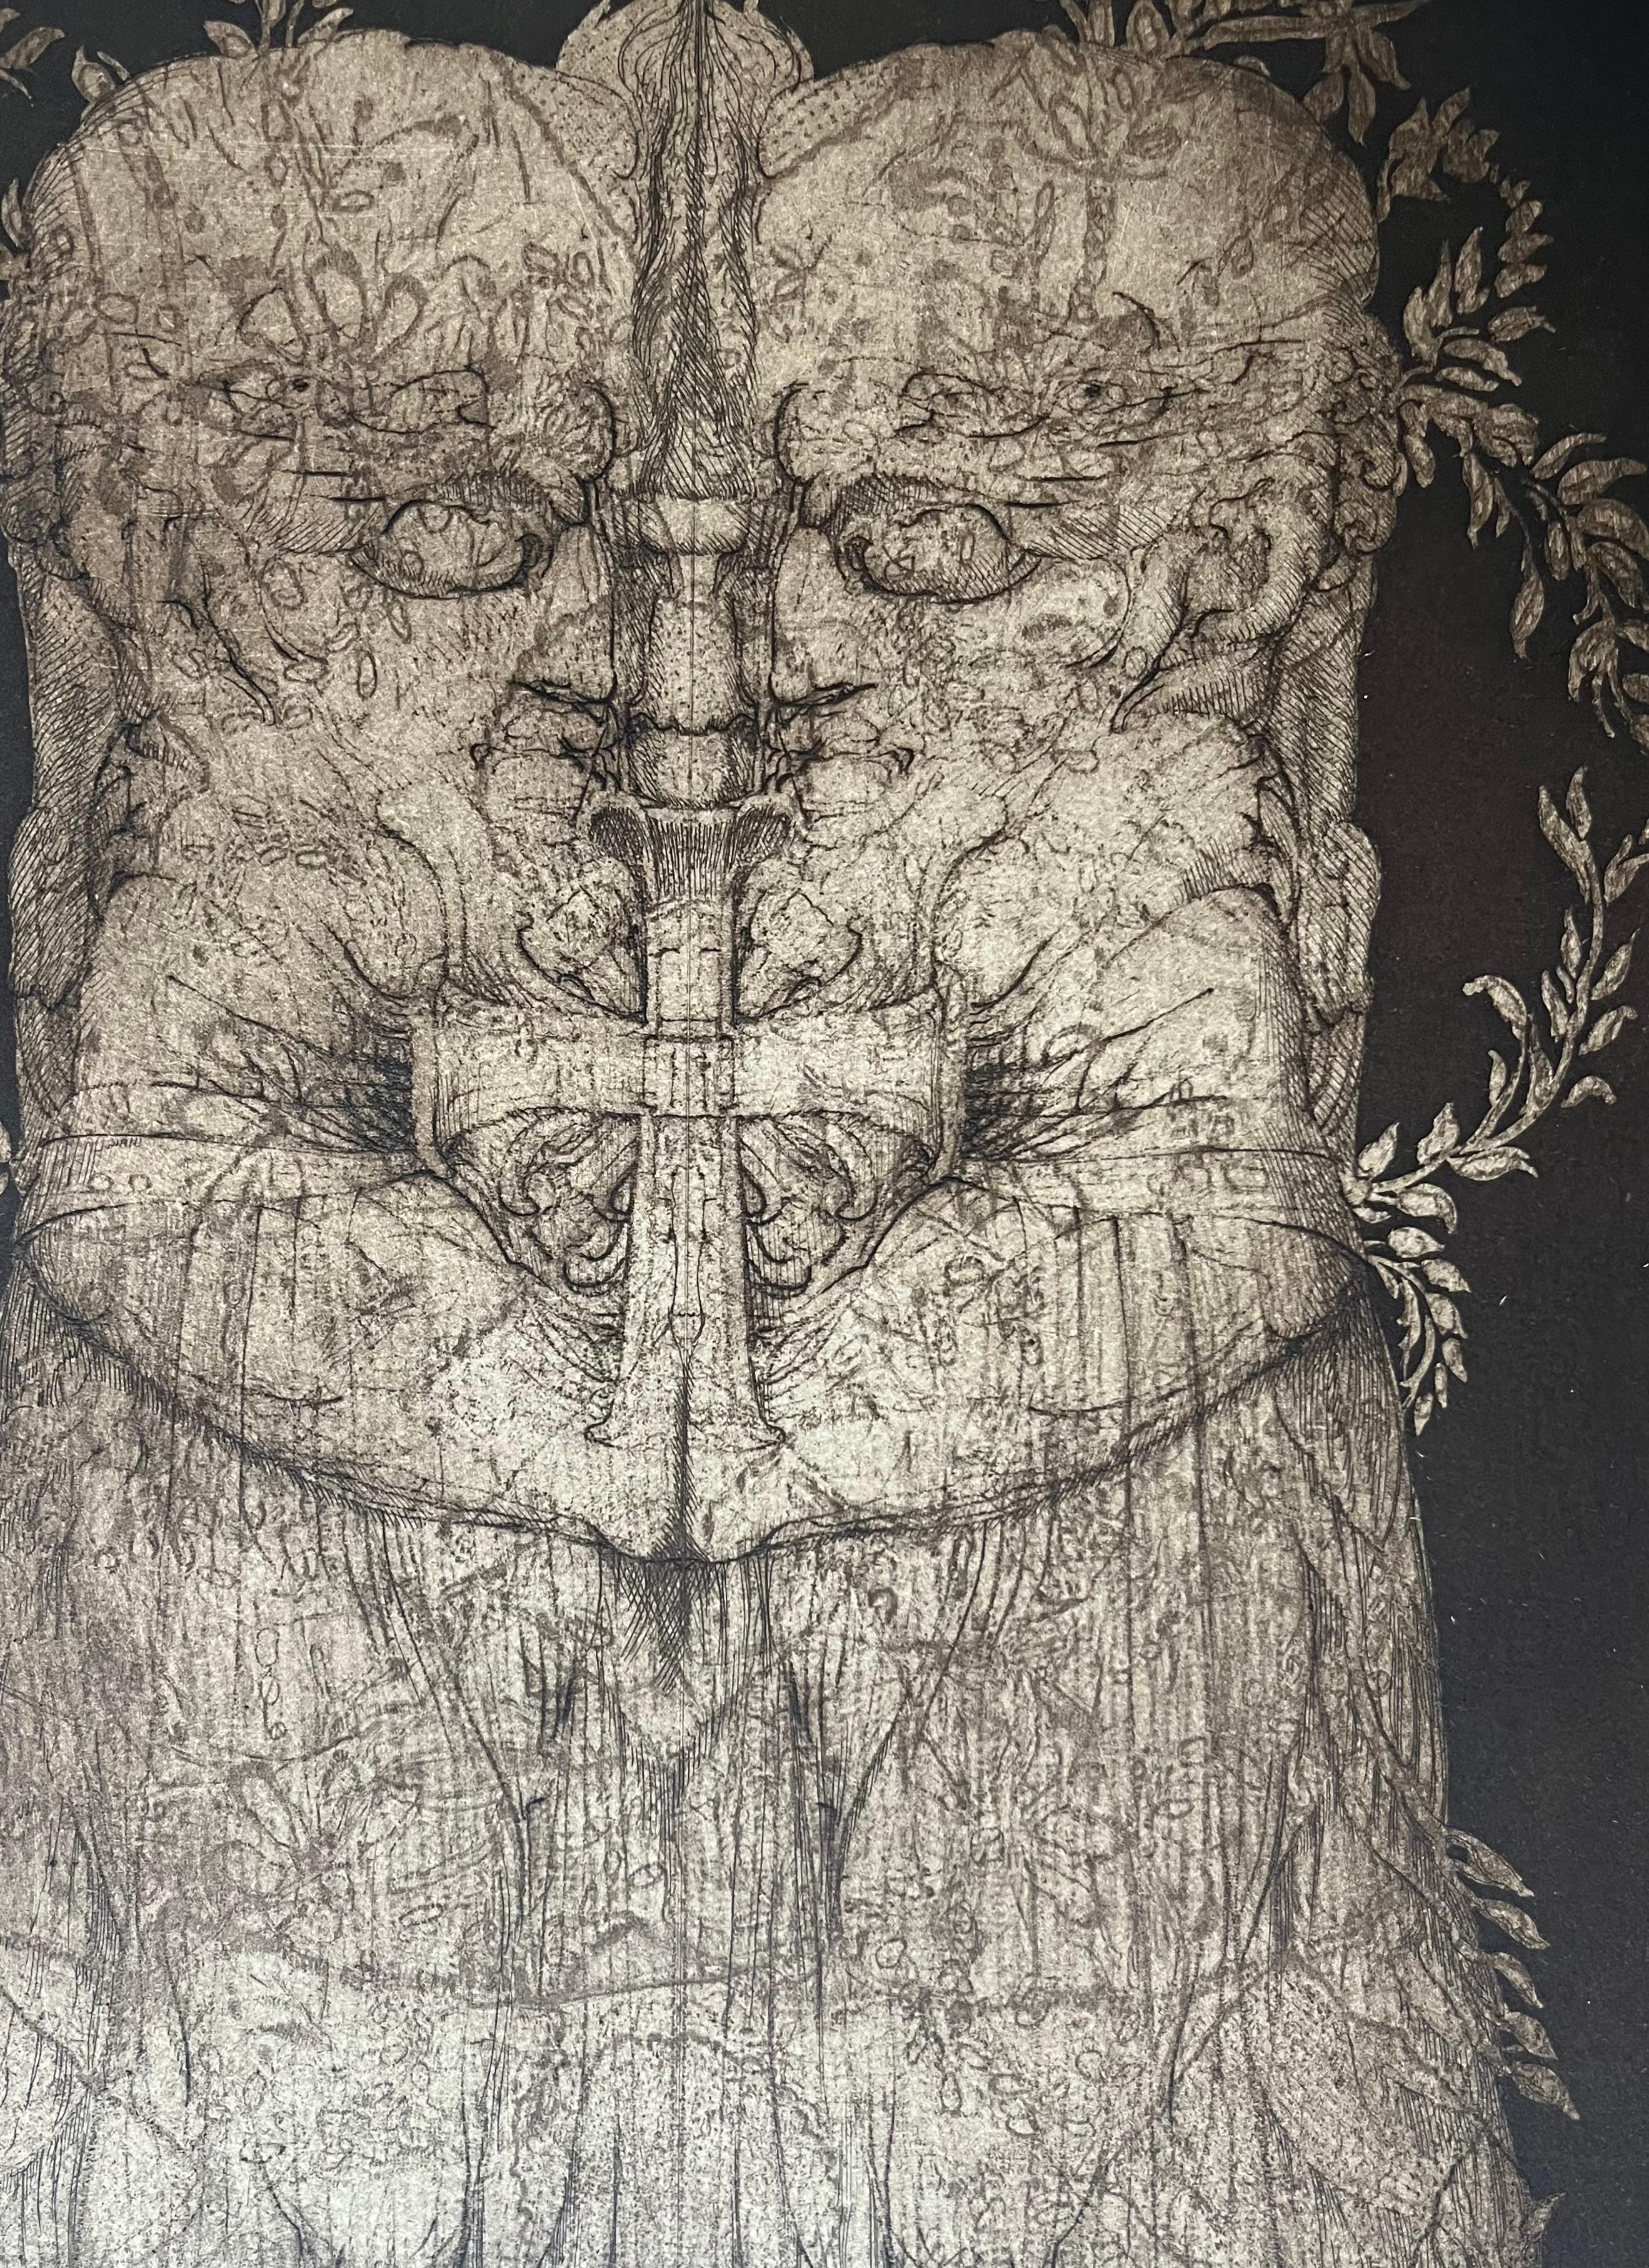 Original engraving #14 by Ernst FUCHS from Kabbalah (THIRTY-TWO PATHS OF WISDOM by SEFER YETZIRA), 1978
Etching signed and numbered 16/30 E.A.
Page size - 30 x 22 in  76 x 56 cm
Image size - 21 x 12.50 in x 53 x 32 cm

This collector's piece,